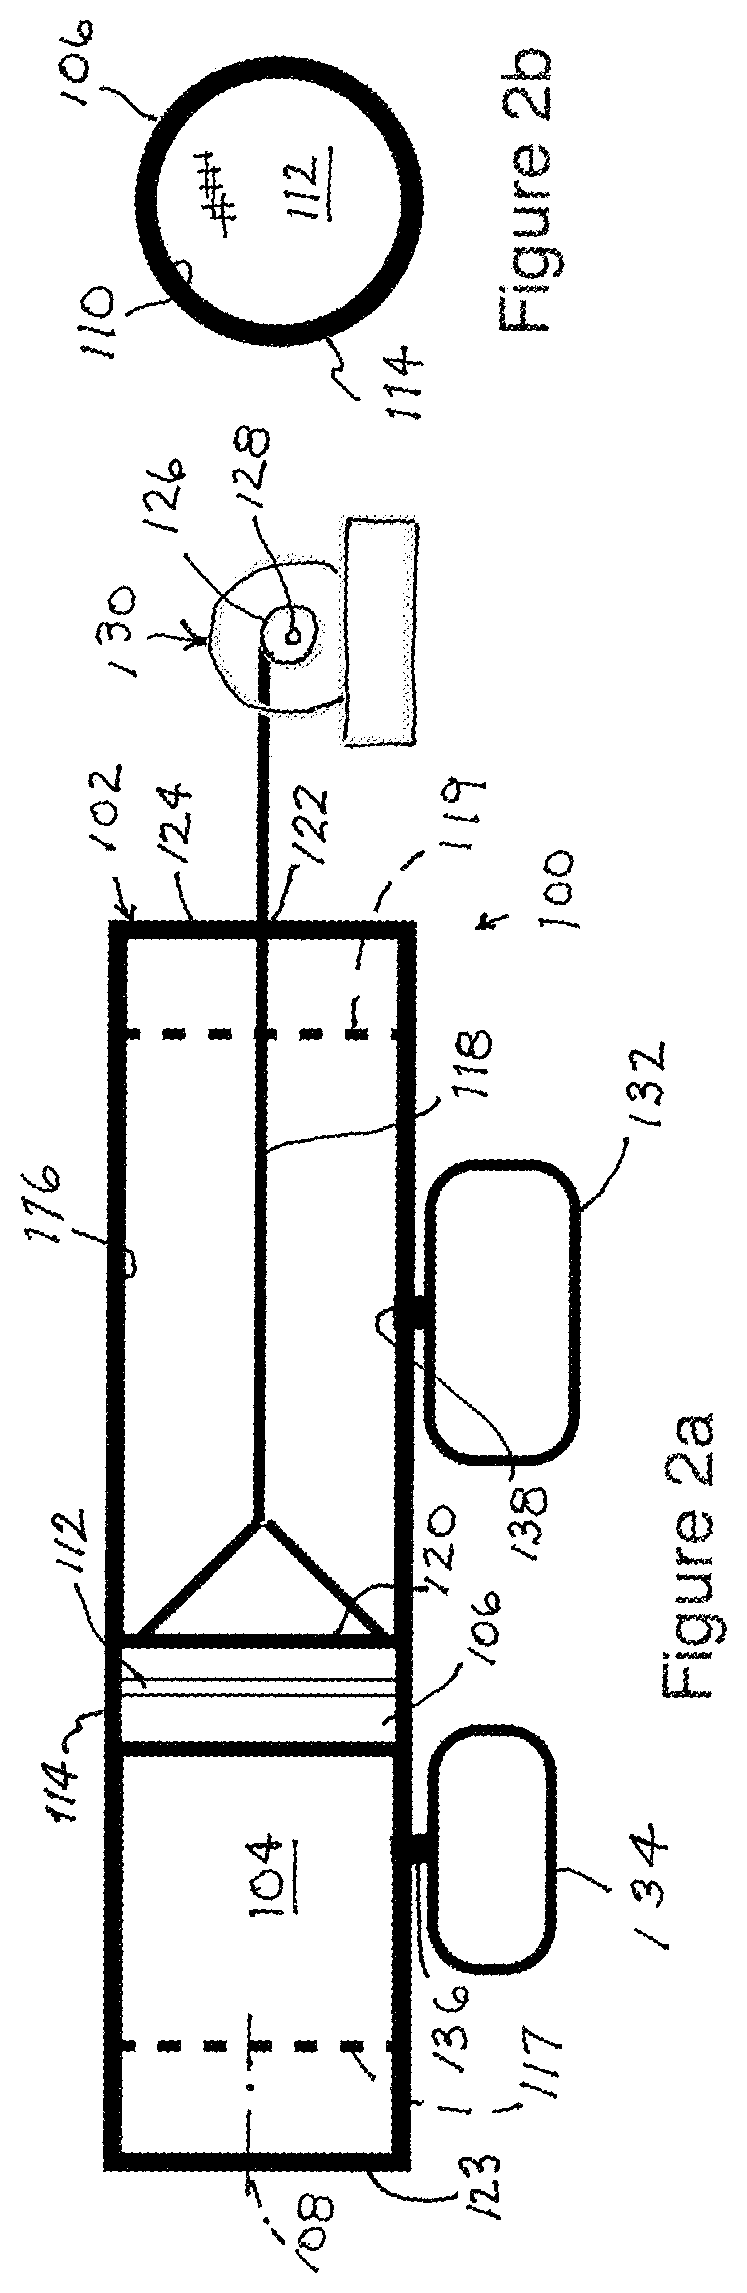 Method and apparatus for mask testing